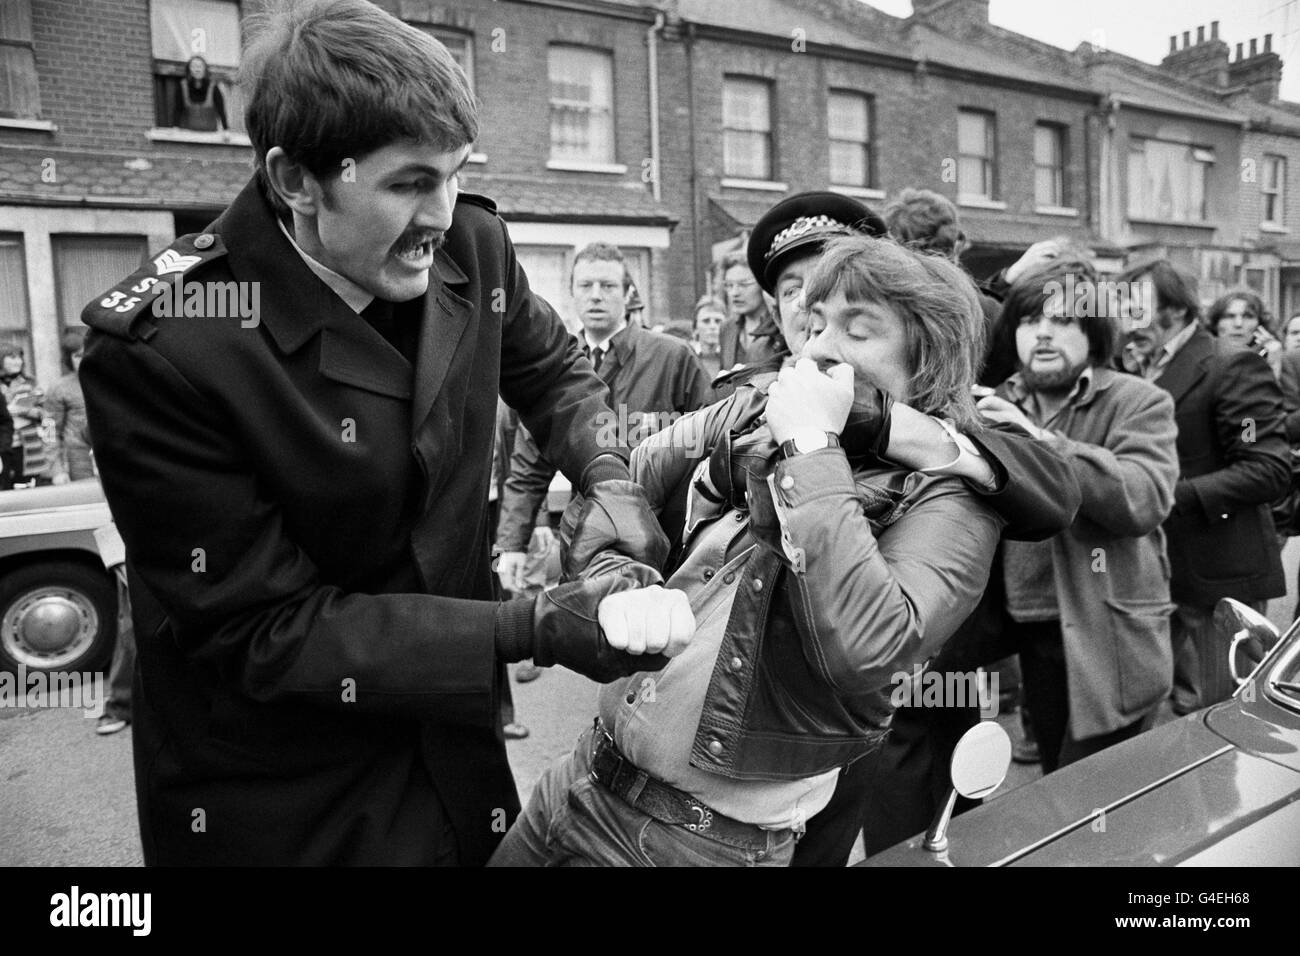 Police restraining pickets outside the Grunwick Processing Laboratories at Willesden, London, who are supporting an official strike by process workers. Stock Photo